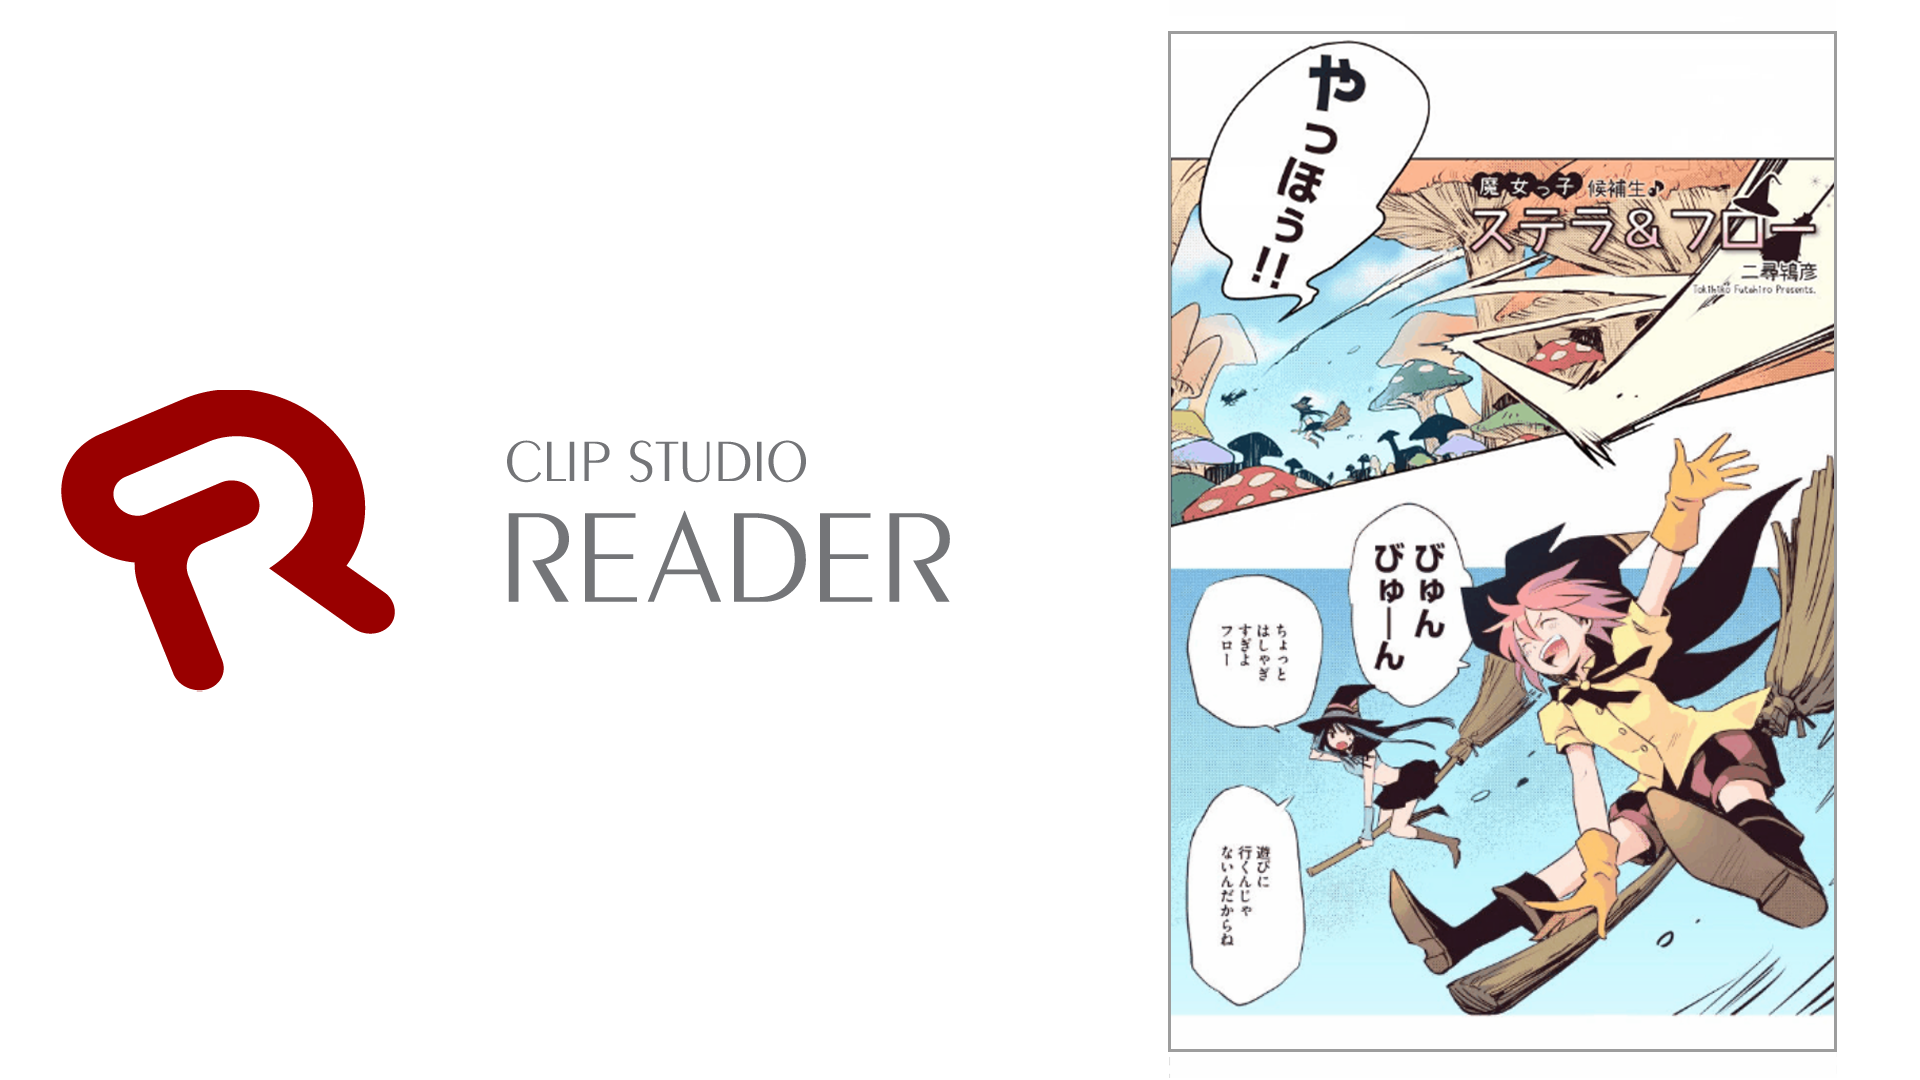 Celsys’ e-book viewer “Clip Studio Reader” now supports dynamic effects in vertical scrolling comics called “Komatoon”